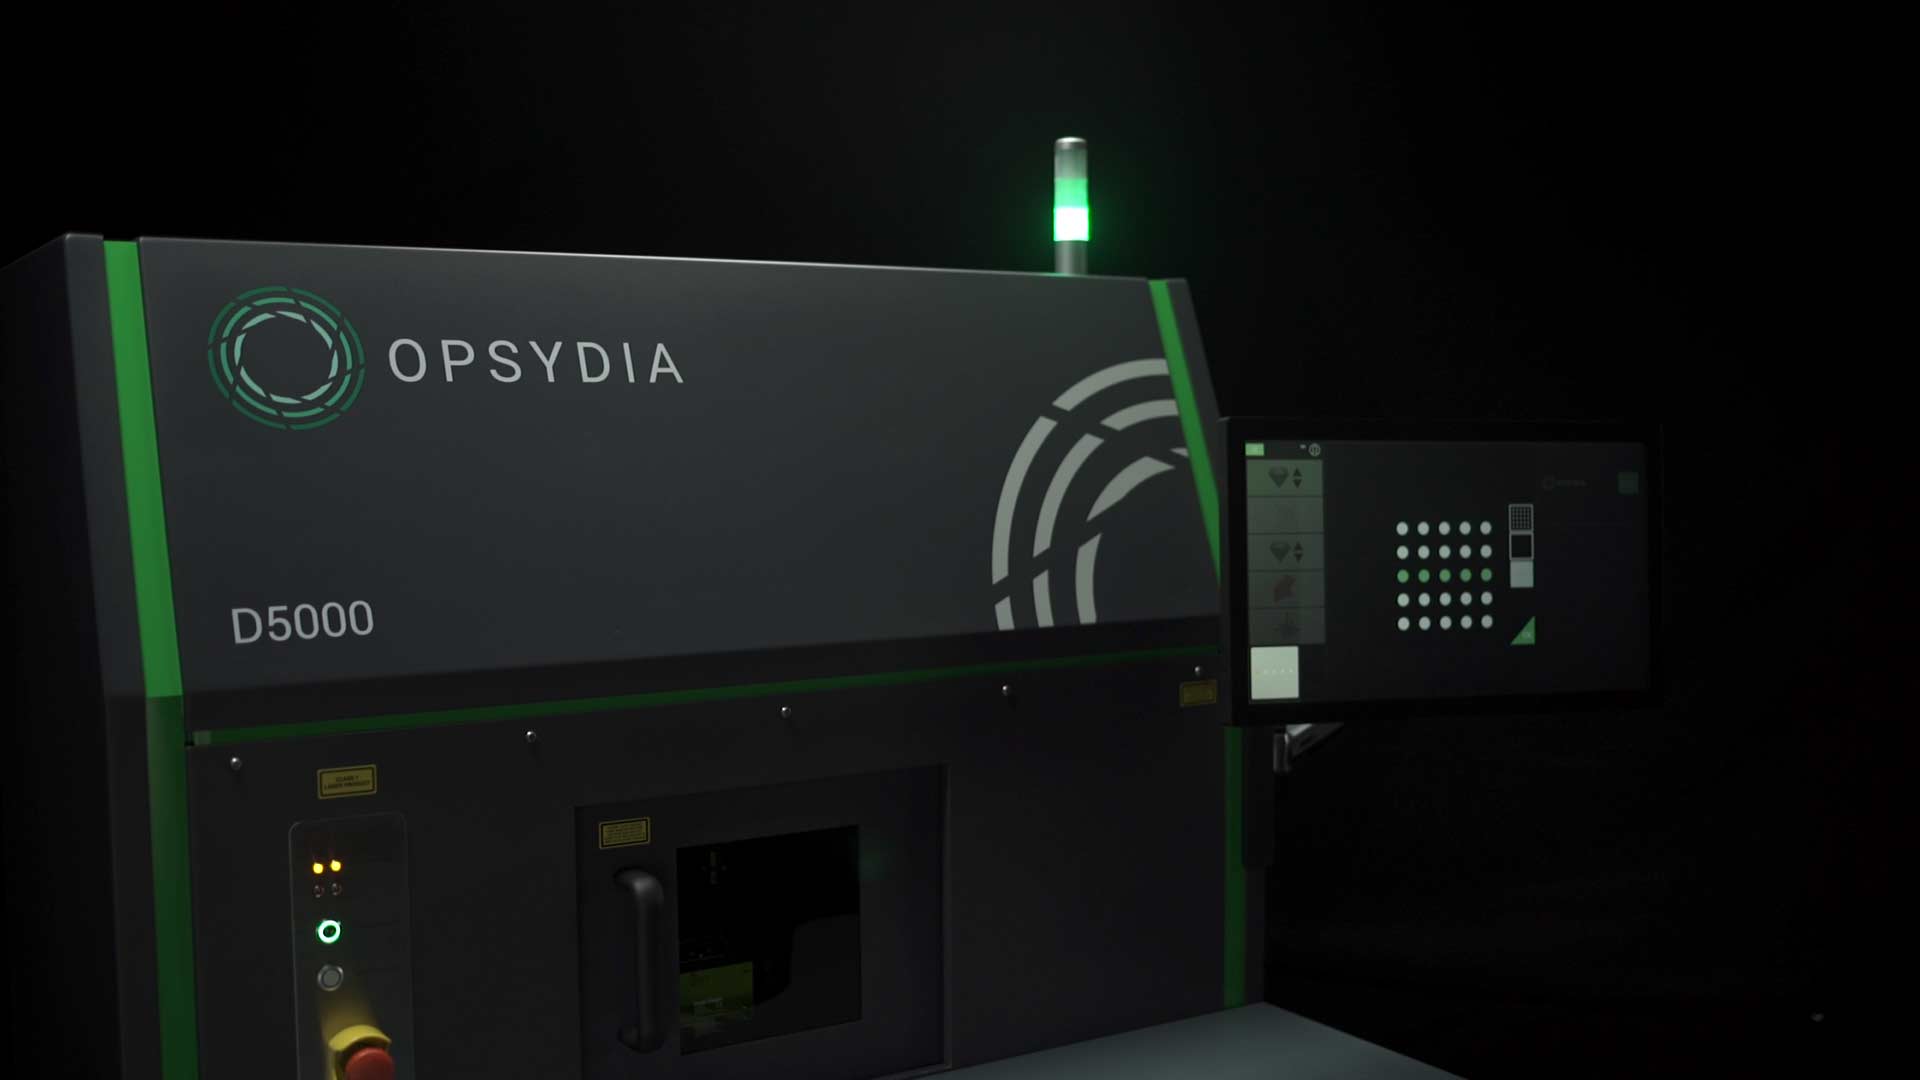 The Opsydia D5000 System to secure the identity of diamonds and transparent materials